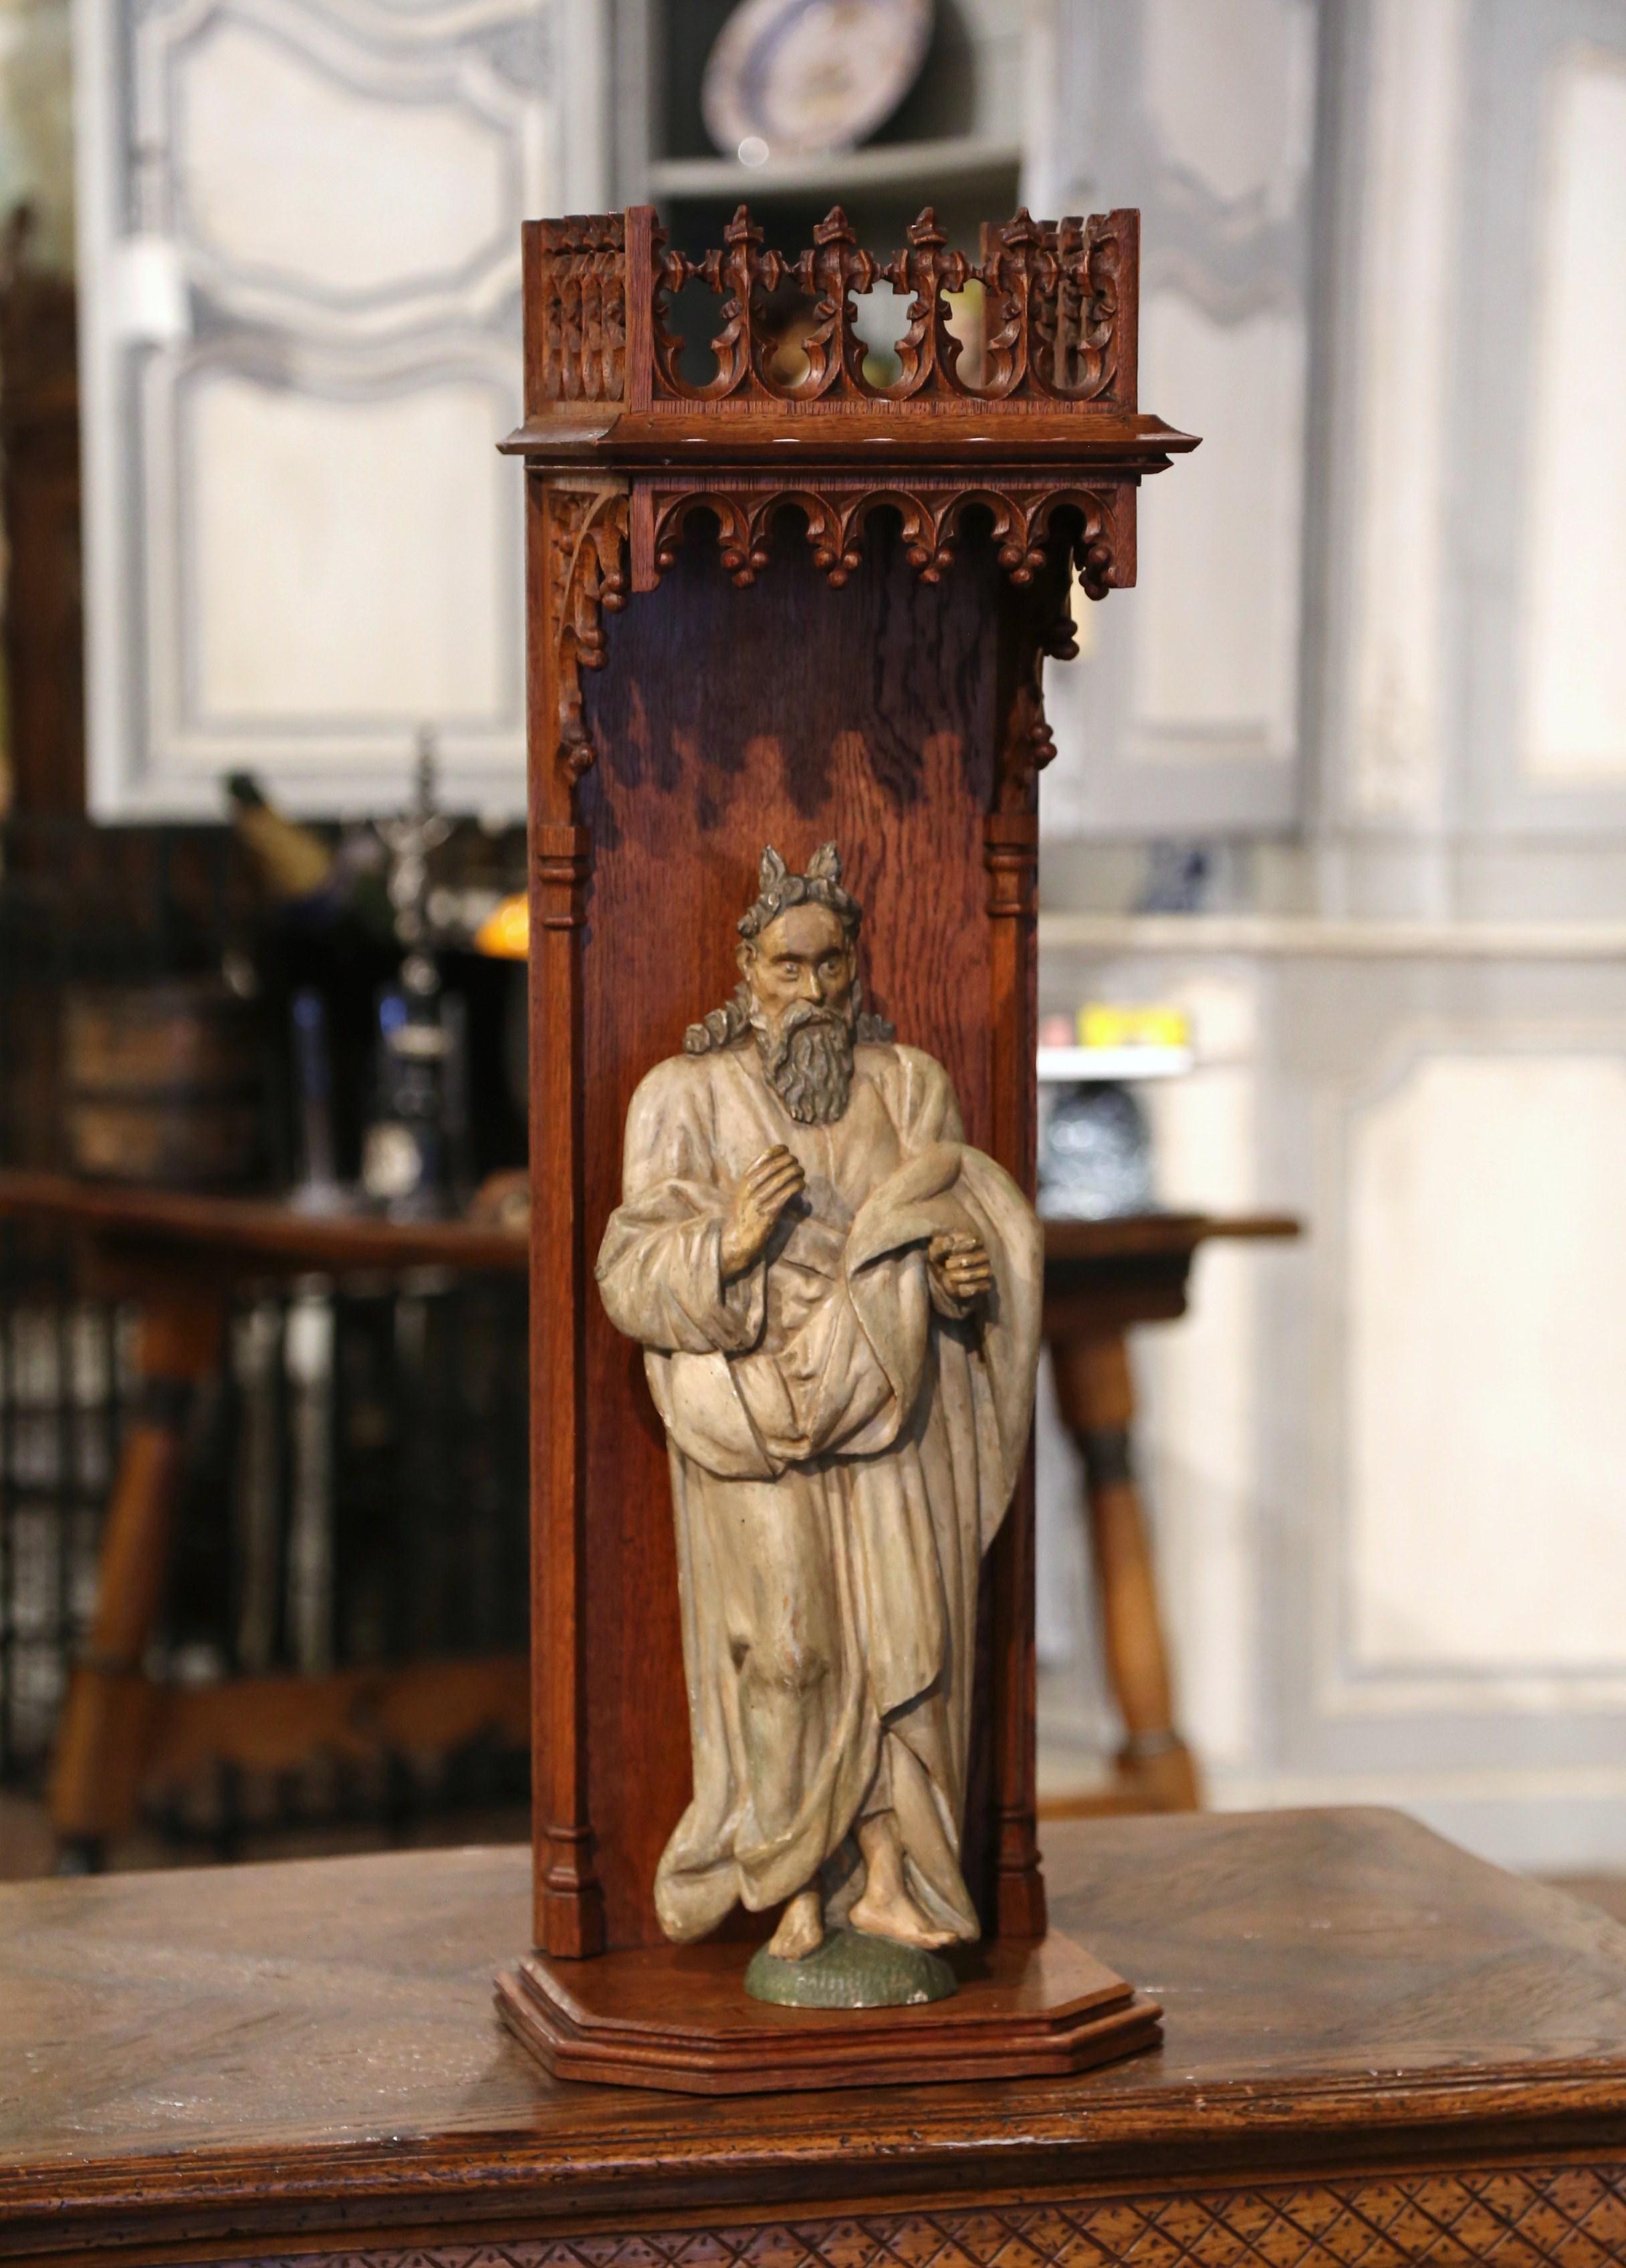 Crafted in France circa 1760 and resting in a carved oak niche, the figure depicts the prophet Moses, the most important prophet in Judaism and Christianity. Moses is best known from the story in the biblical Book of Exodus and Quran as the lawgiver